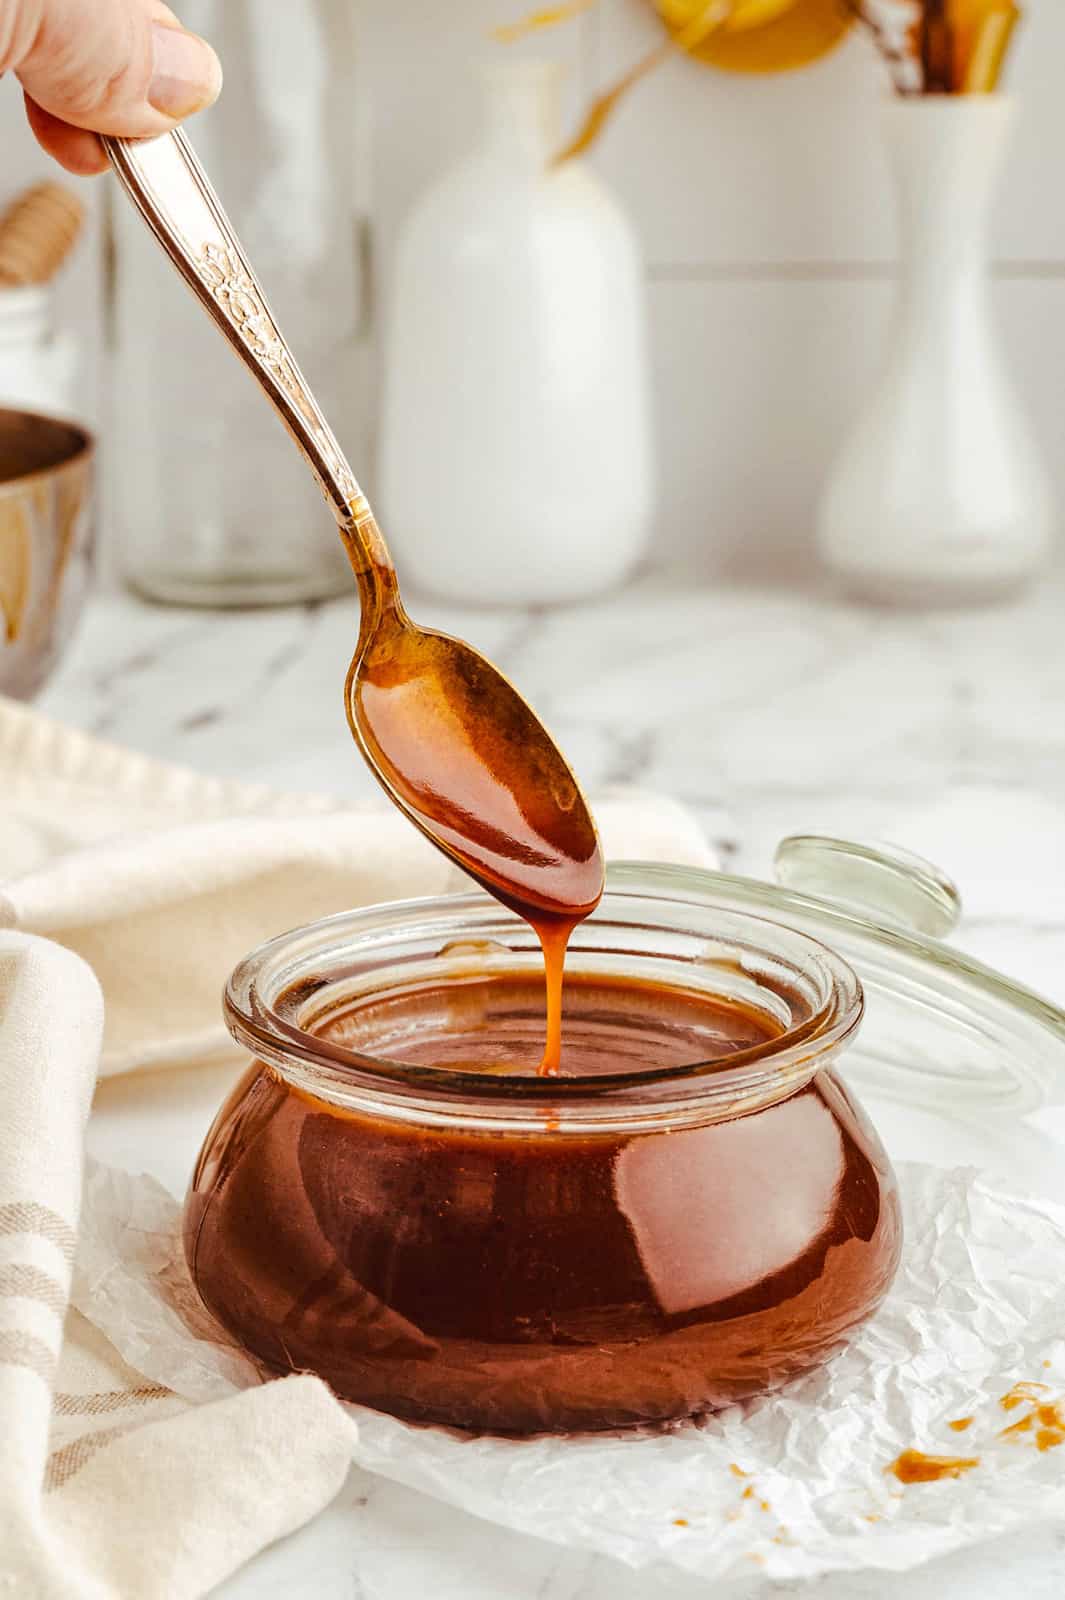 Bourbon Caramel Sauce in jar with spoon dripping sauce.